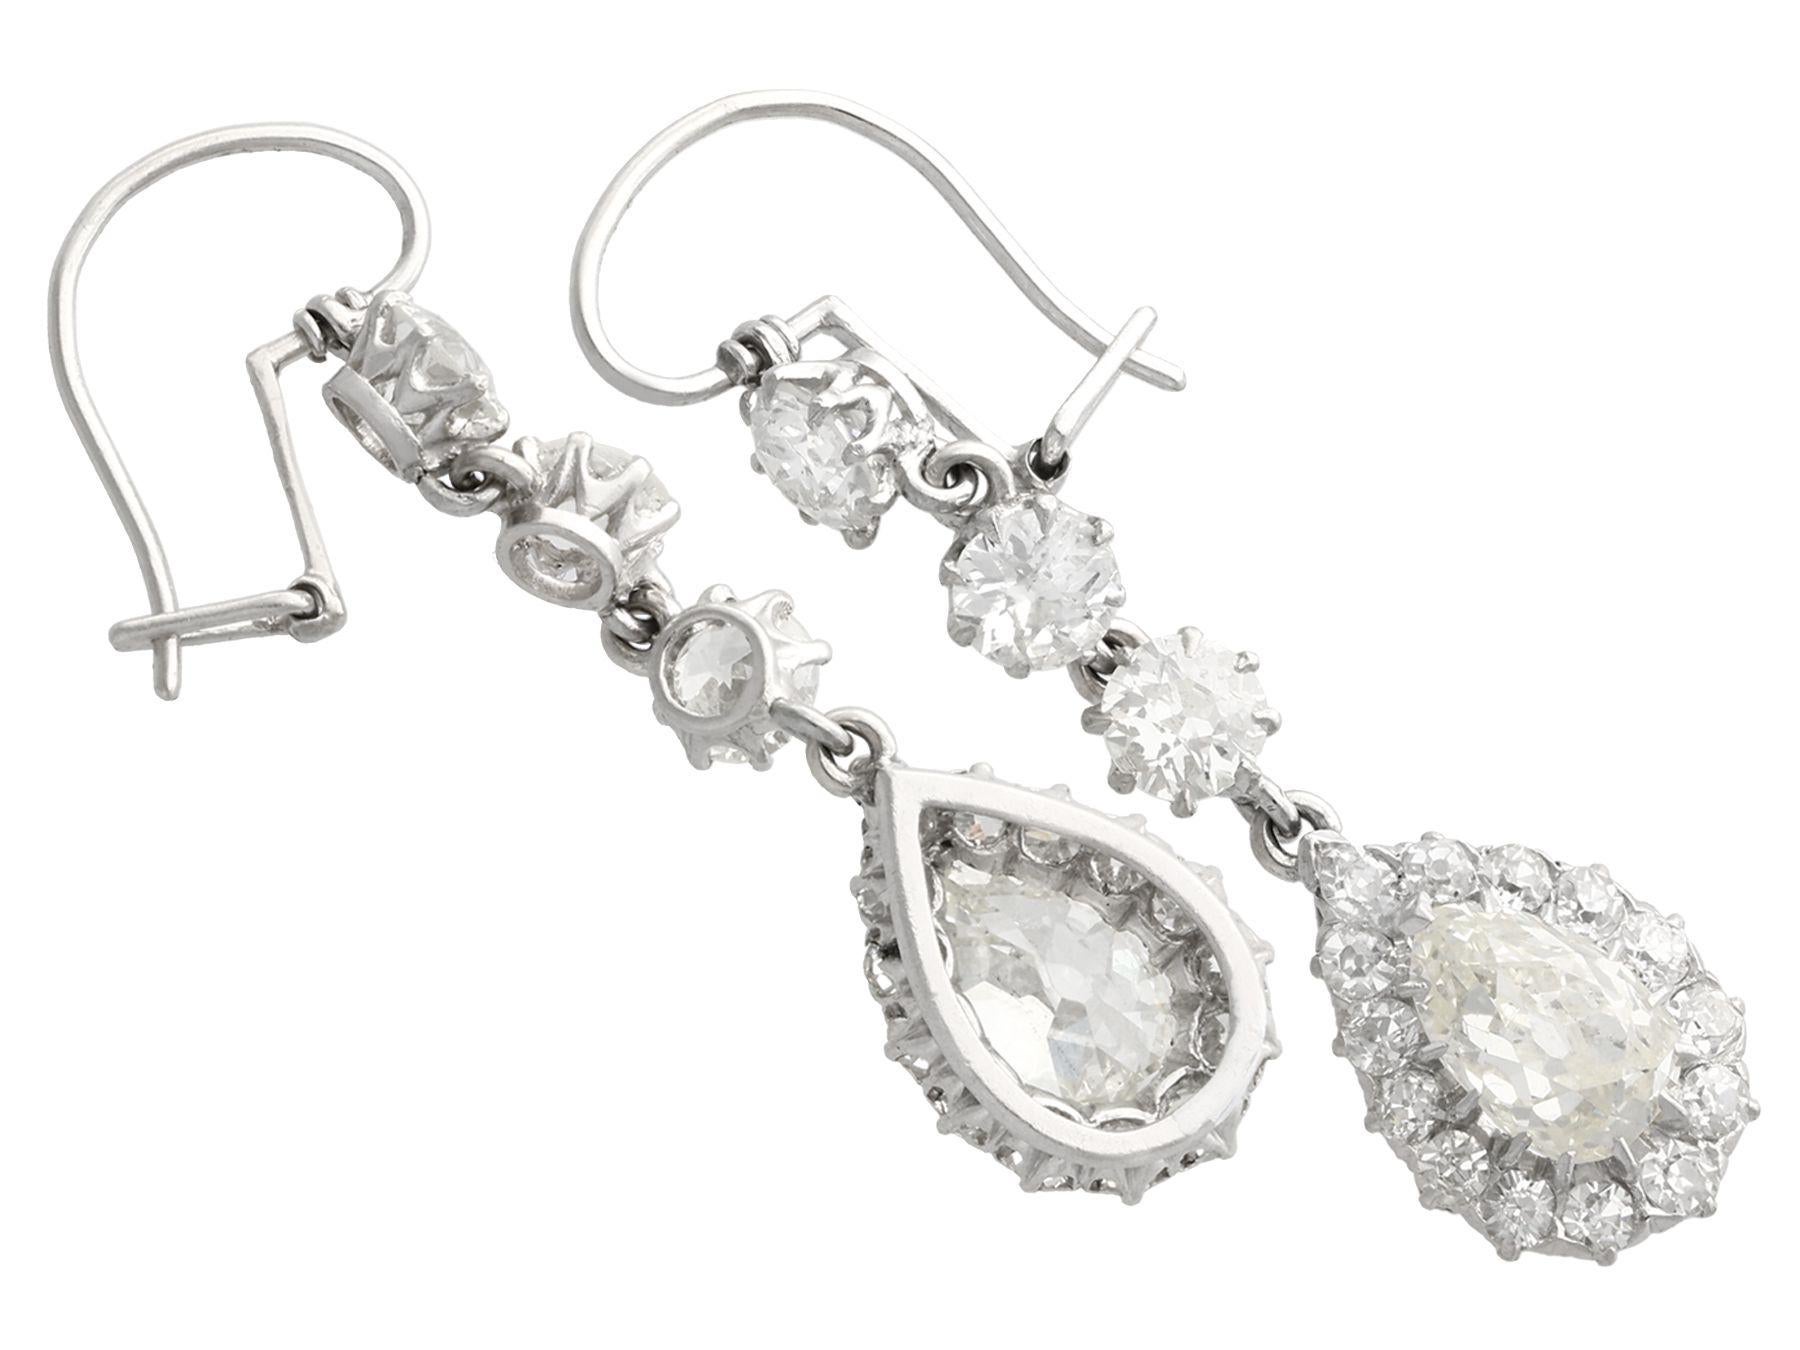 A stunning, fine and impressive pair of antique 6.22 carat diamond and platinum earrings; part of our diverse diamond jewelry and estate jewelry collections

These stunning antique earrings have been crafted in platinum.

Each earring has a feature